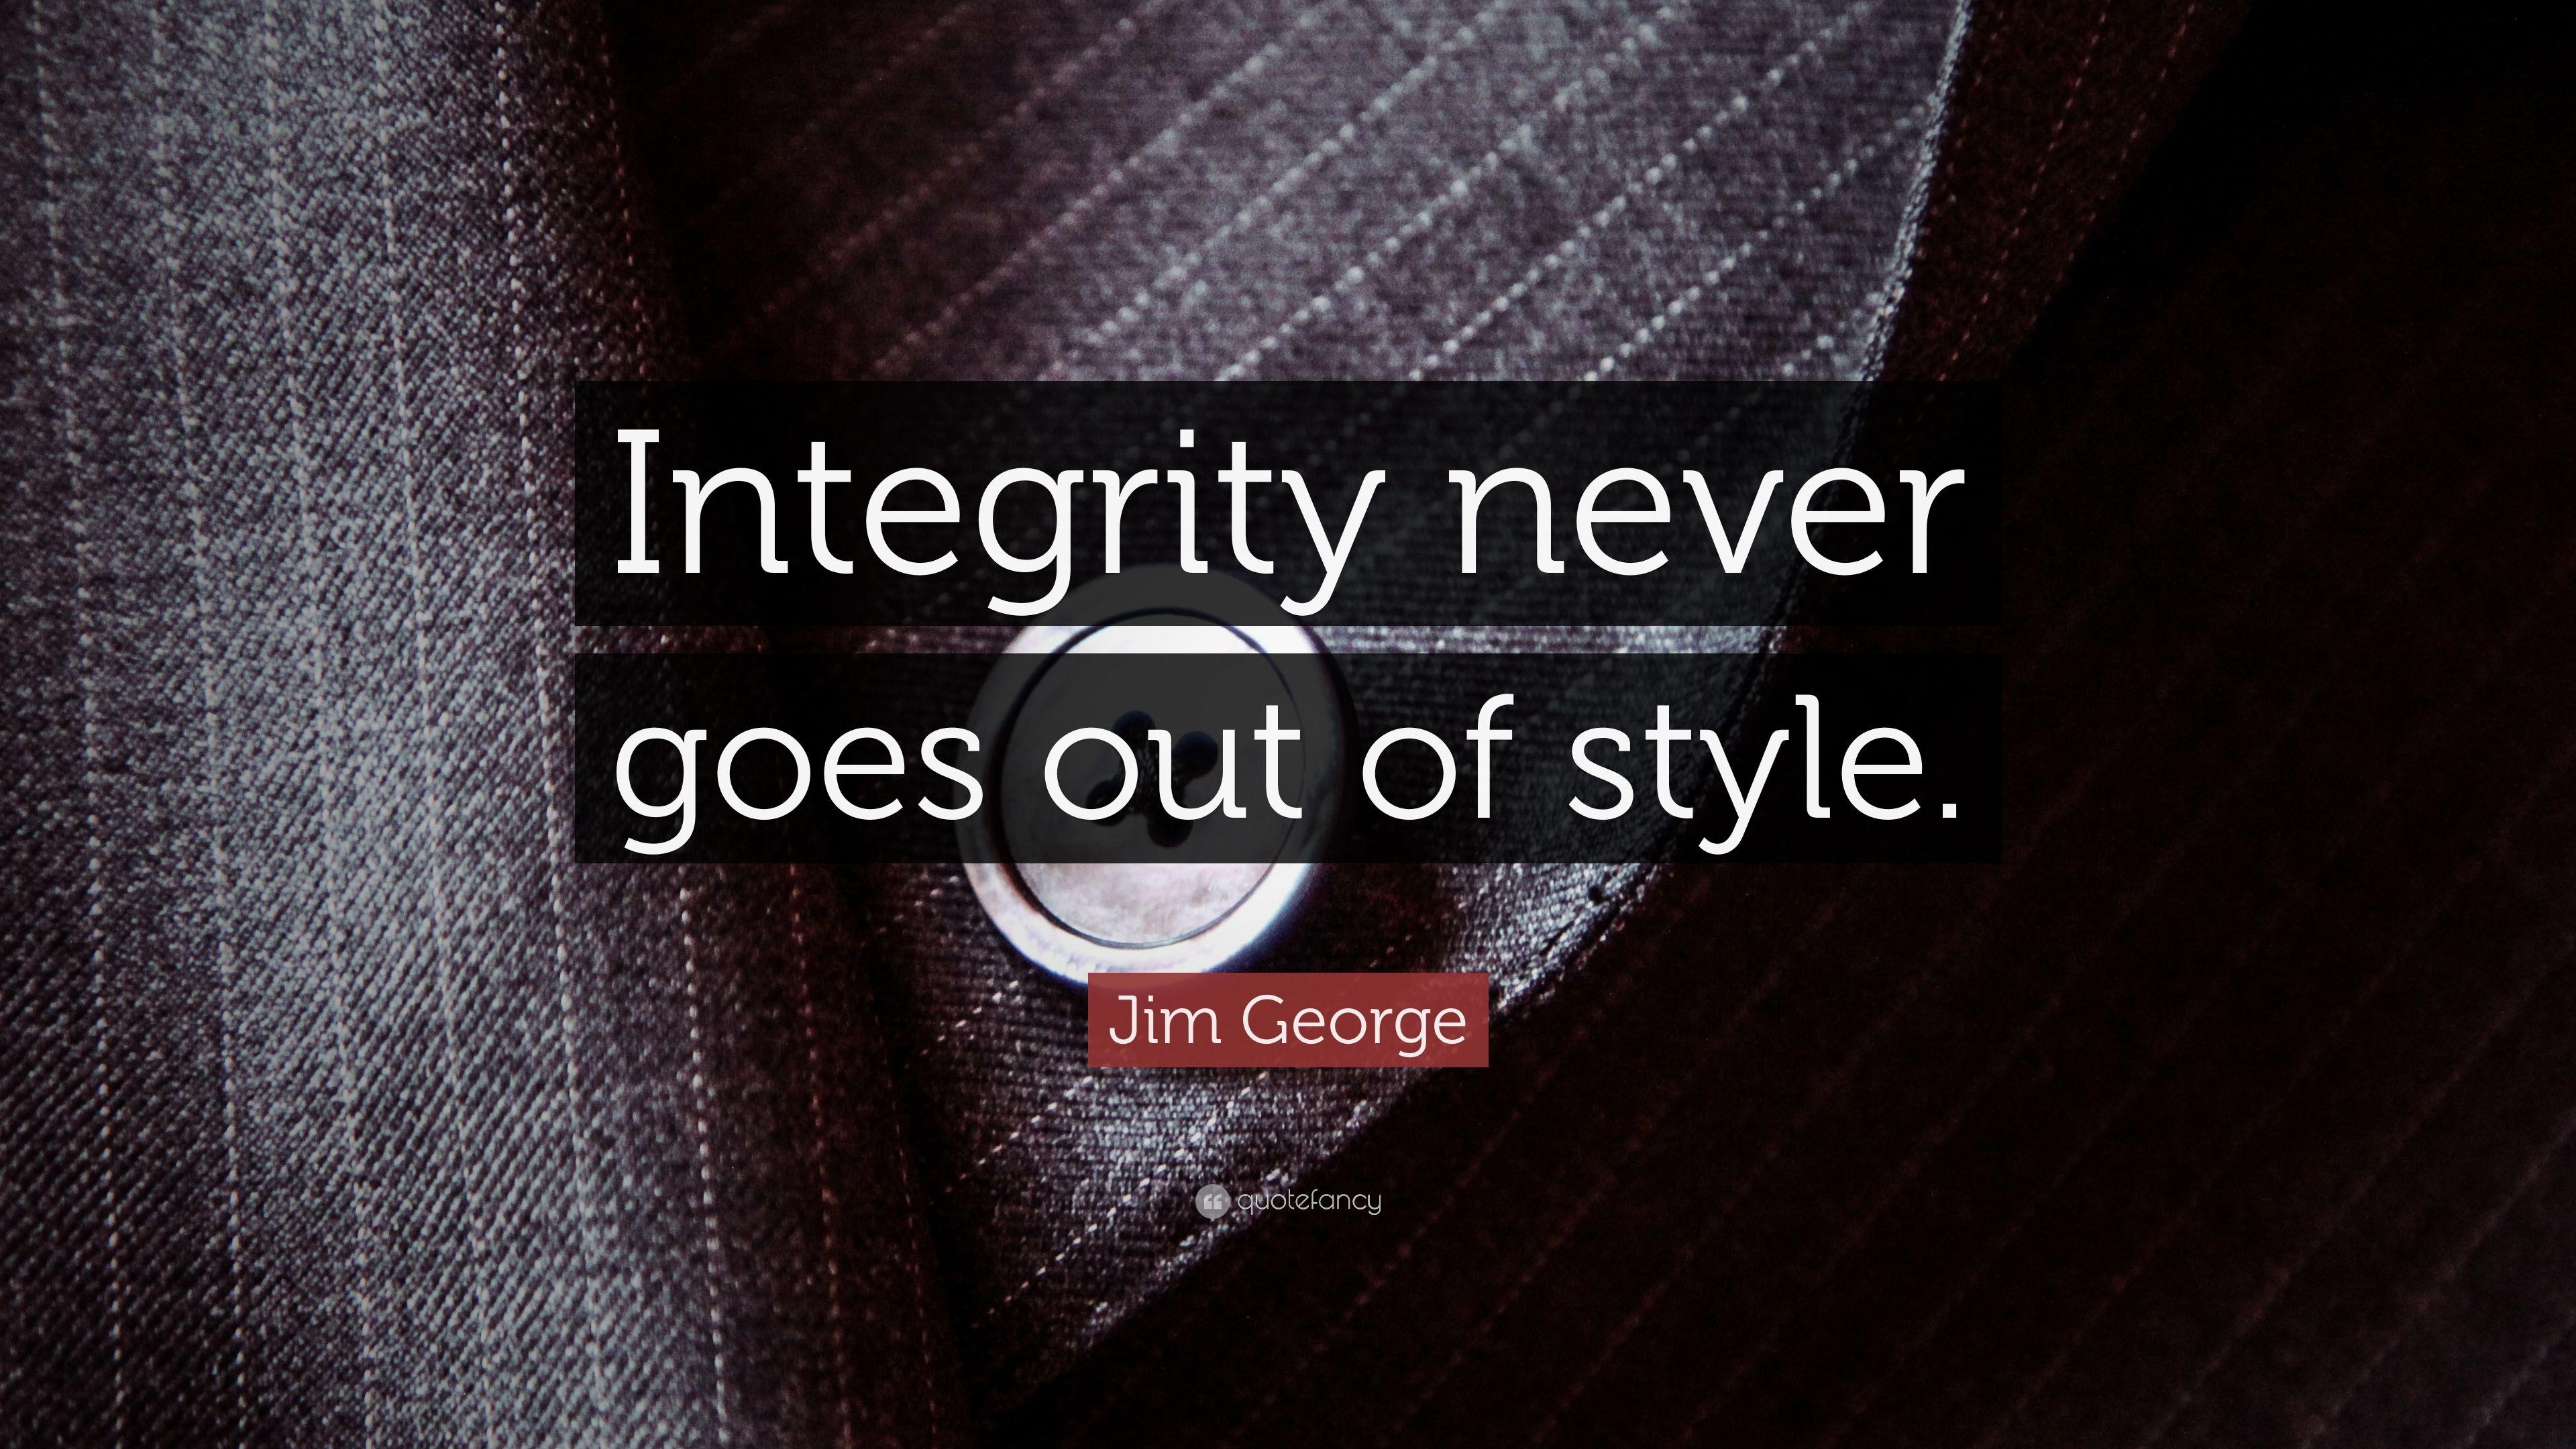 Jim George Quote: “Integrity never goes out of style.” 17